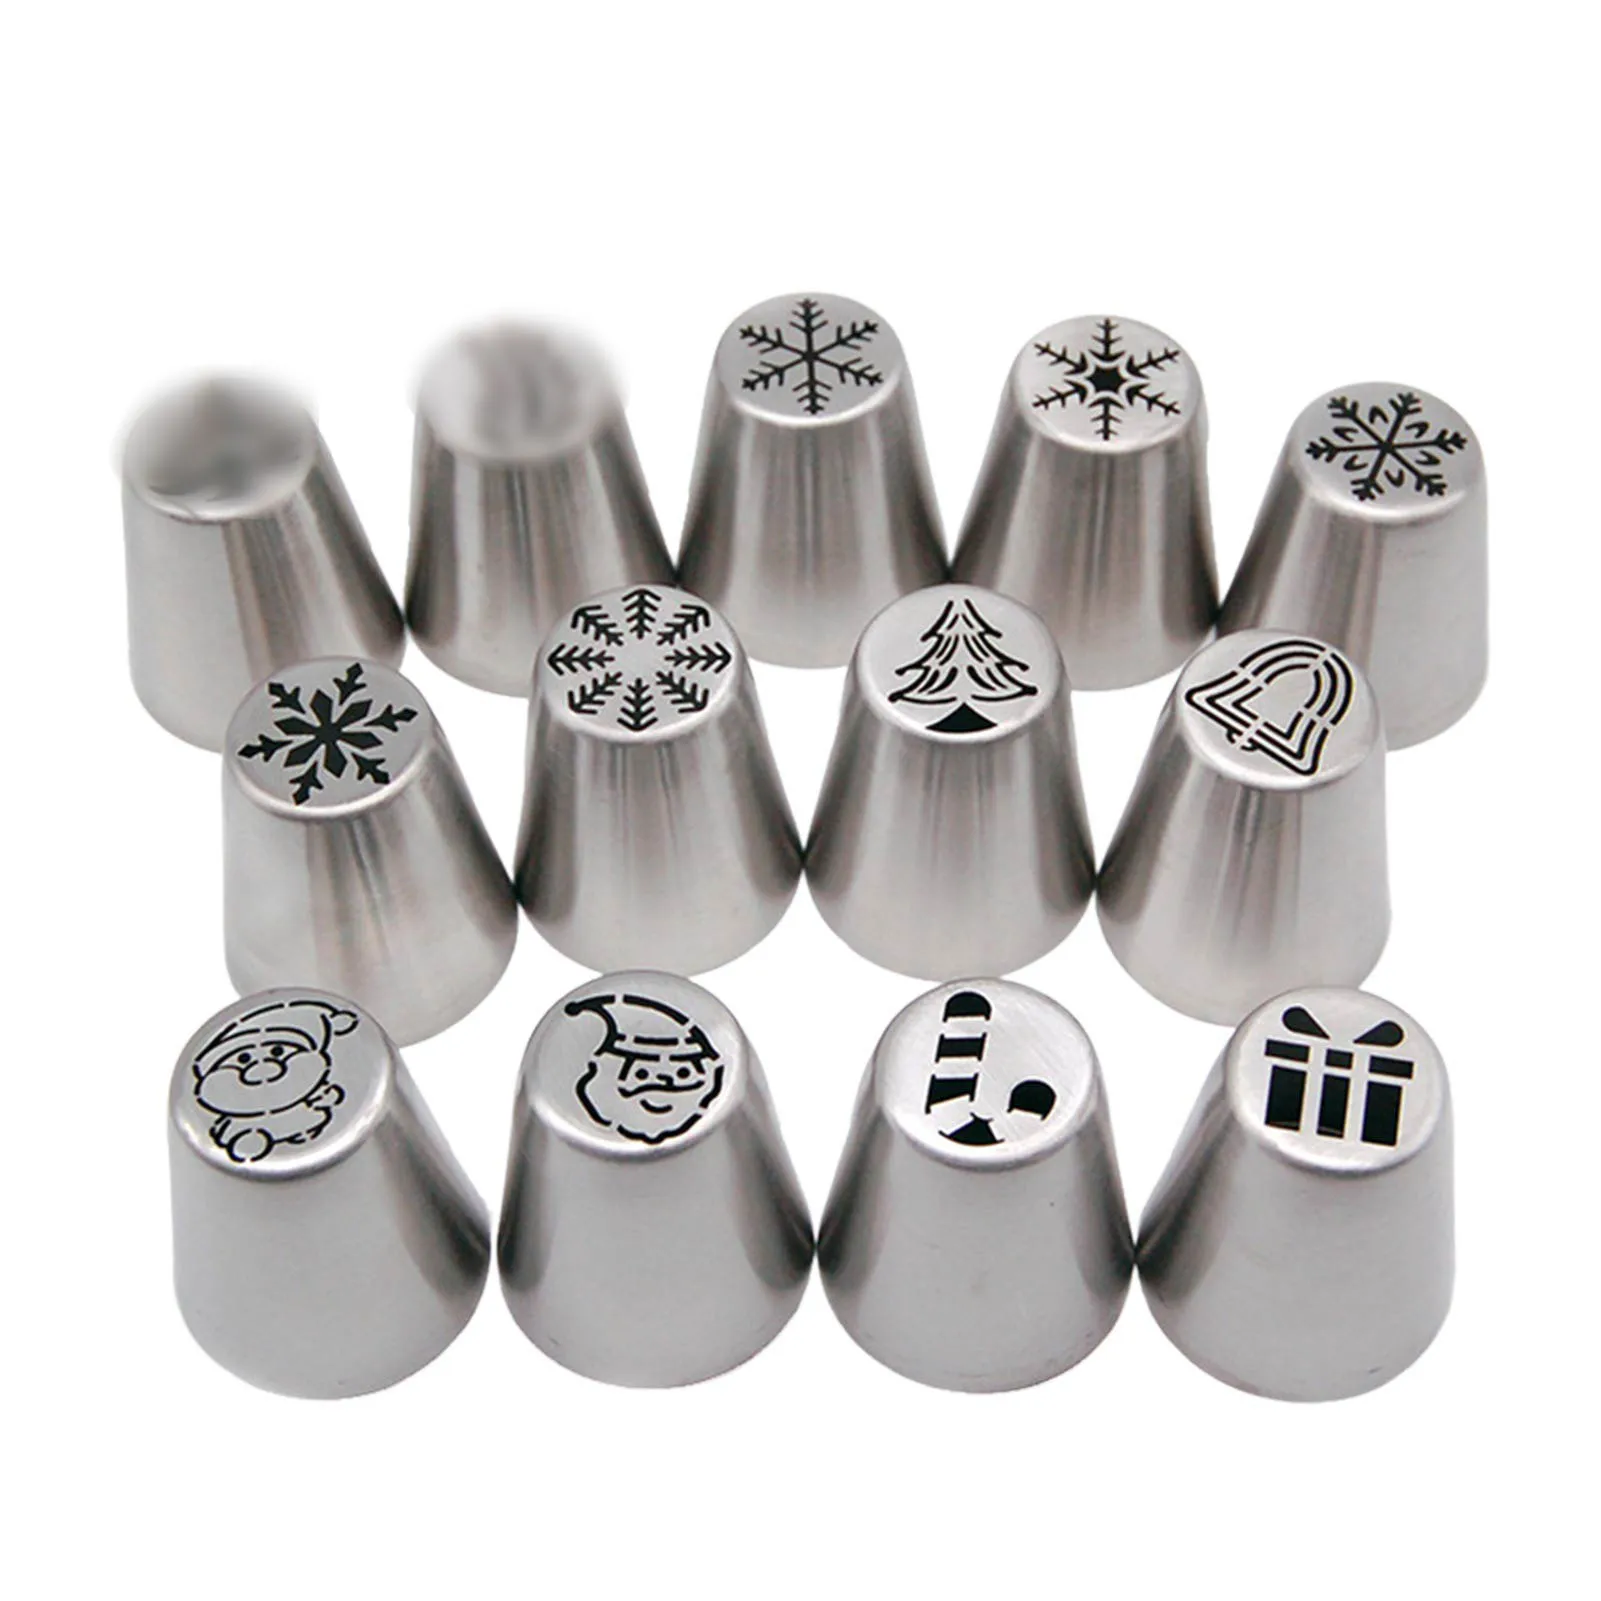 

Christmas Snowflake Cake Chocolate Russian Nozzles Stainless Steel Icing Piping Nozzle Pastry Tips DIY Baking Decorating Tools